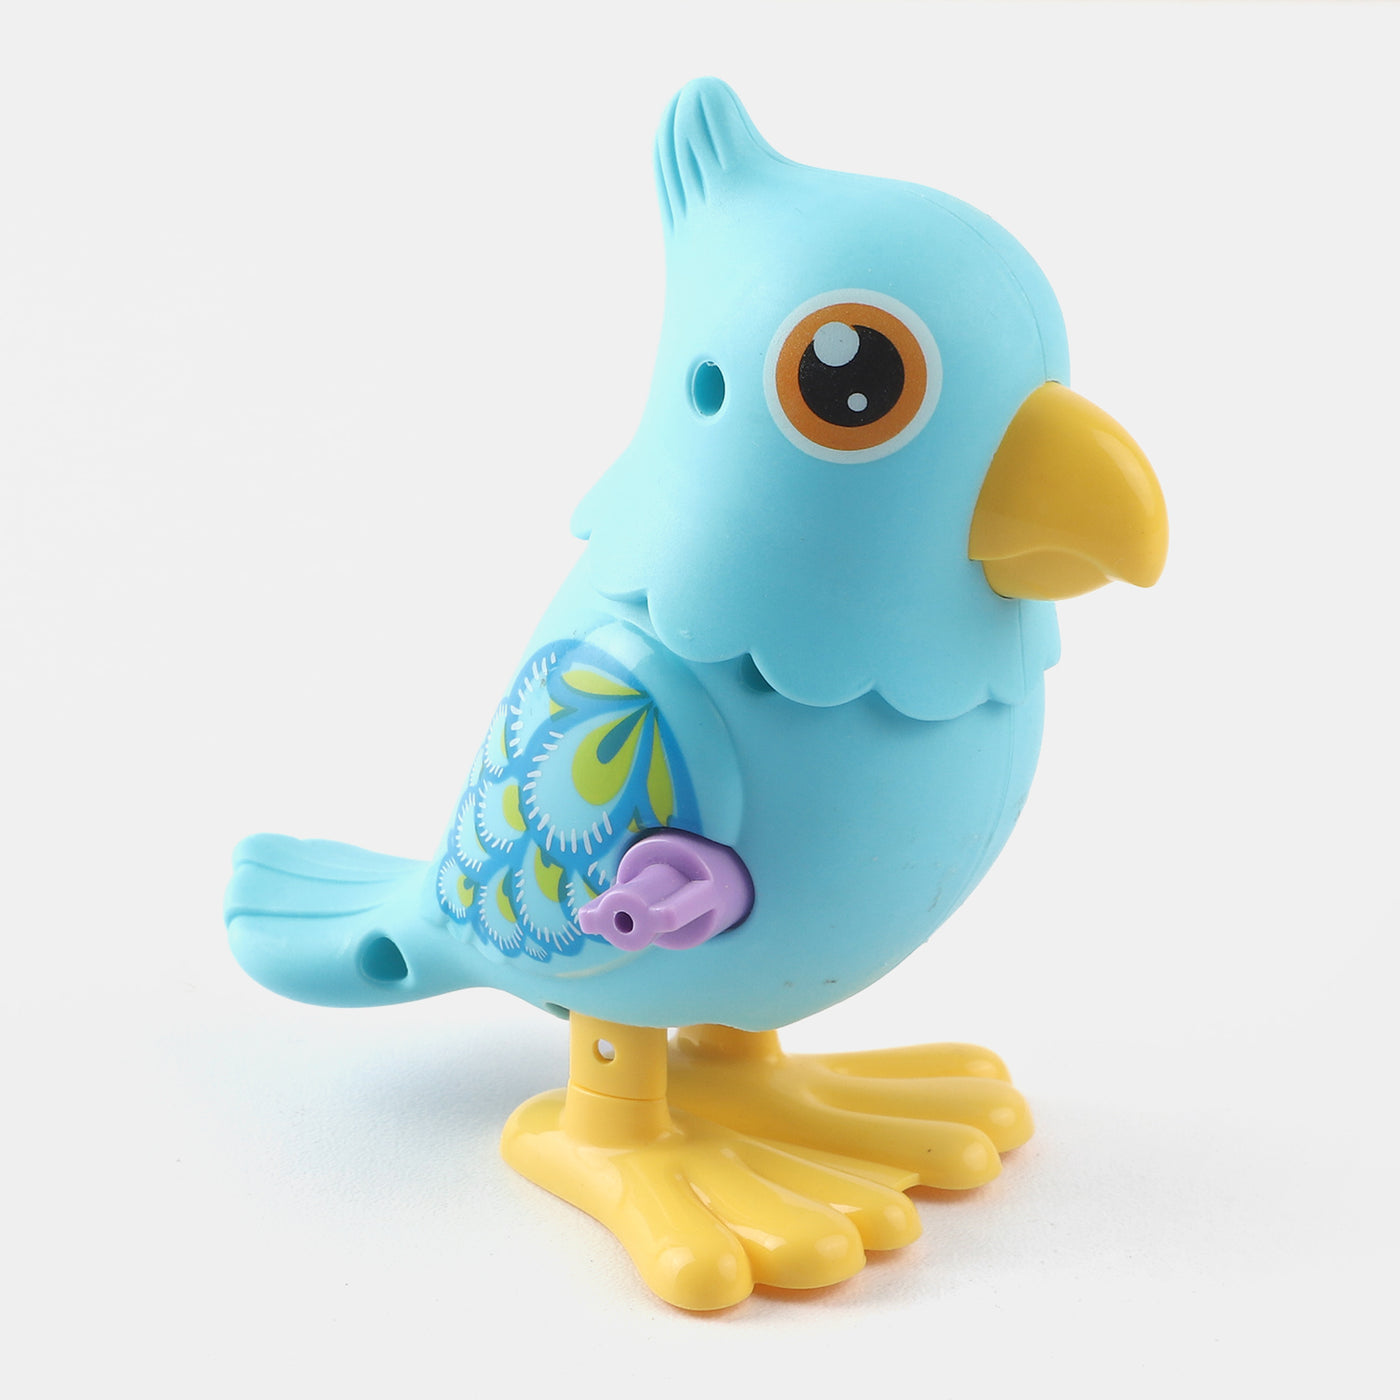 Wind Up Parrot Play Toy For Kids